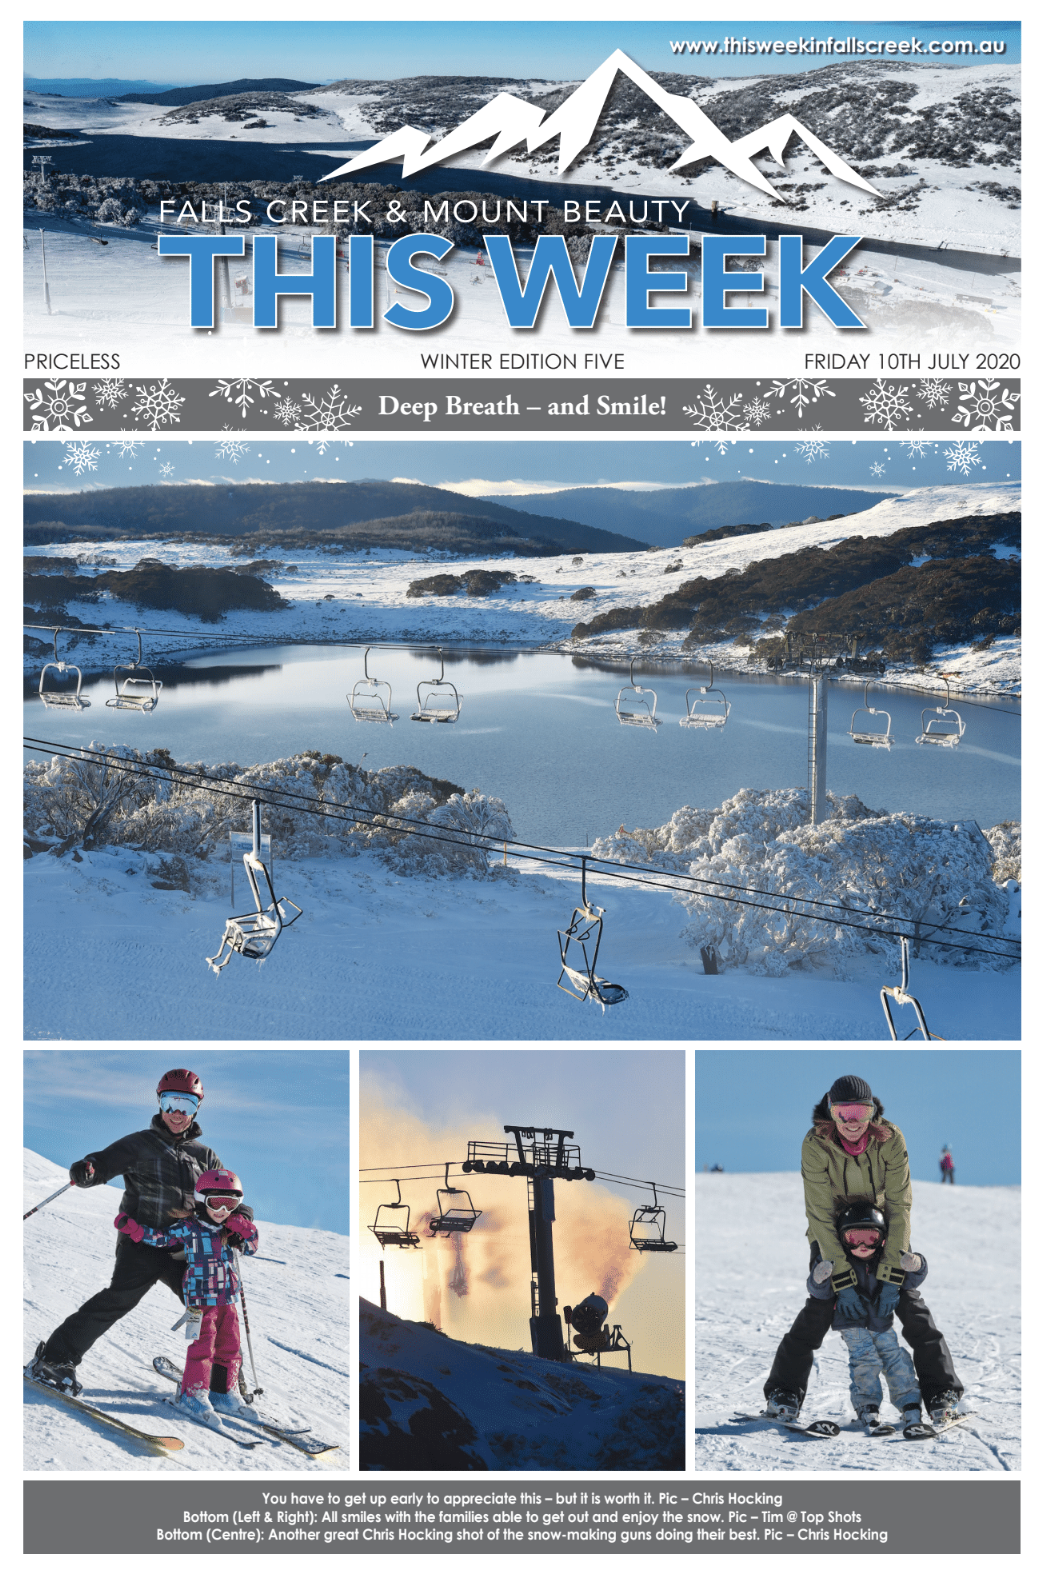 Winter Edition #5 - 10th July